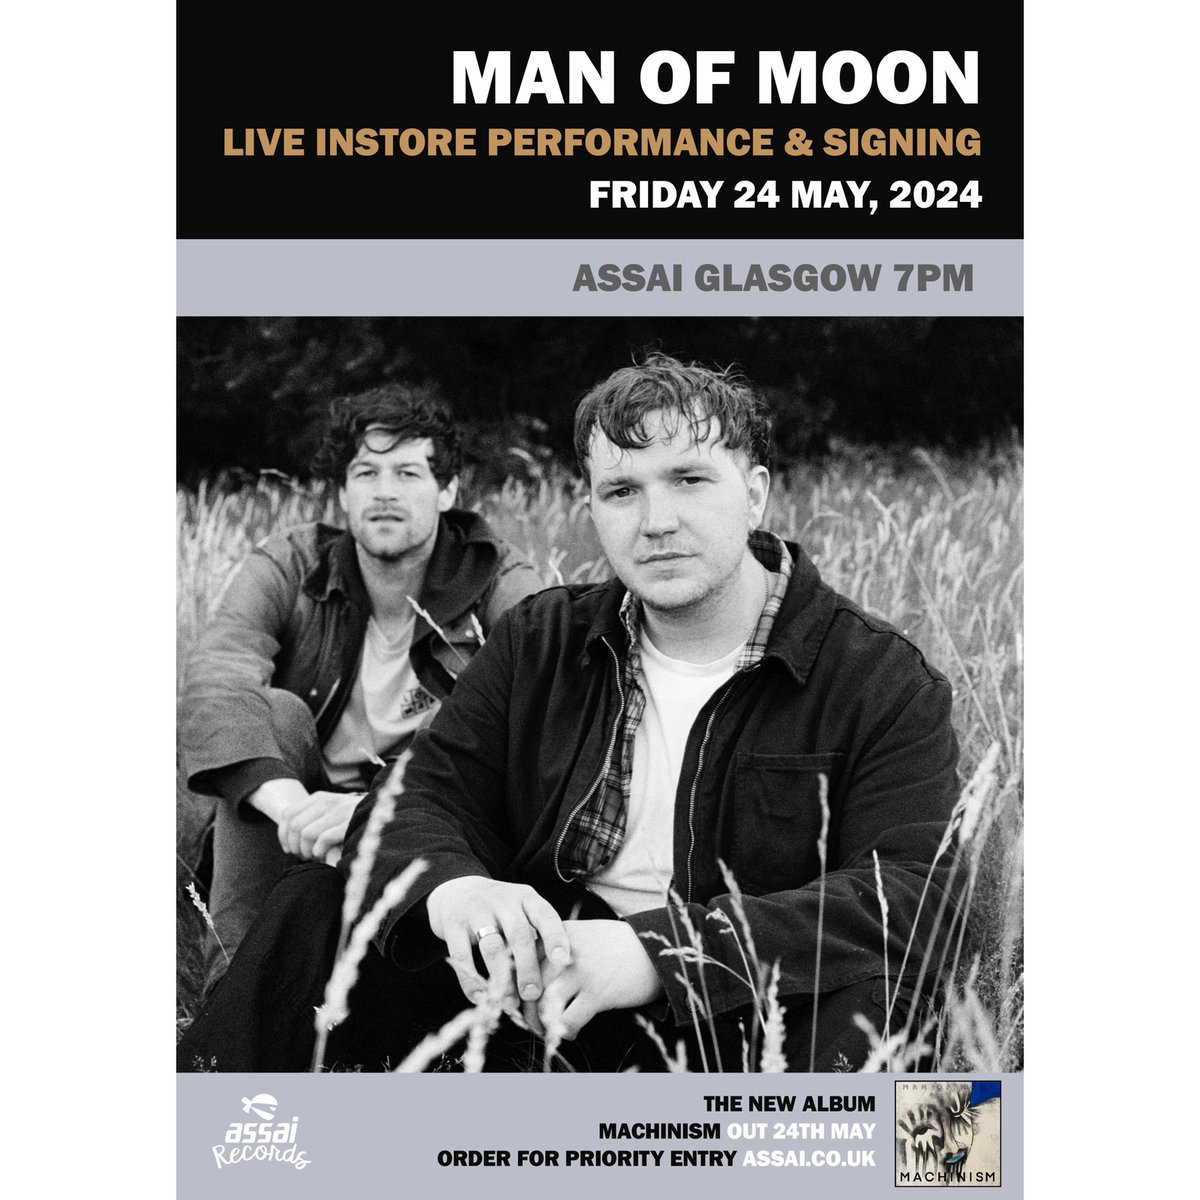 MAN OF MOON | INSTORE PERFORMANCE + SIGNING 🌘

Glasgow's @Man__of__Moon join us on Fri 24th May at 7pm for a instore performance in celebration of their new album 'Machinism' (also out 24/05!).

Priority entry bundles >>> tinyurl.com/MOMAssaiGLA

@Assai_UK @WhatsOnGlasgow